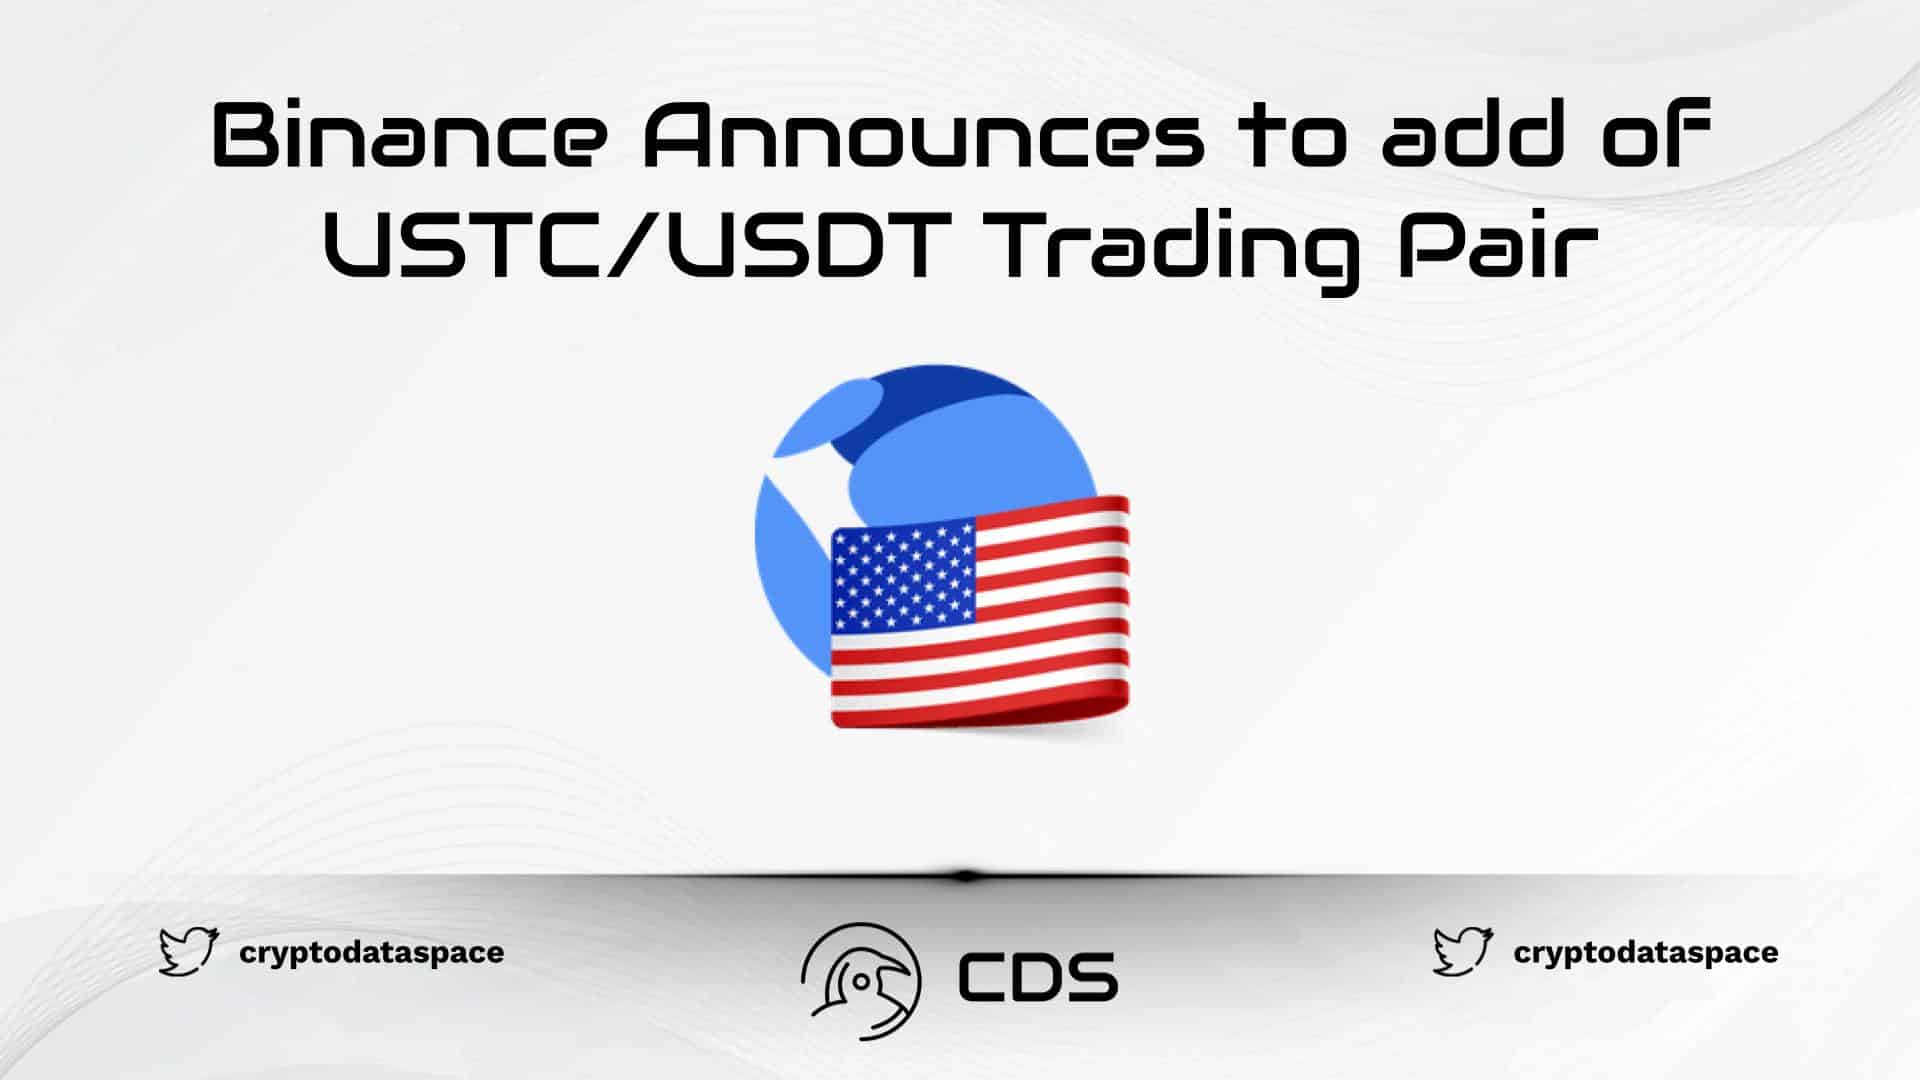 Binance Announces to add of USTC/USDT Trading Pair